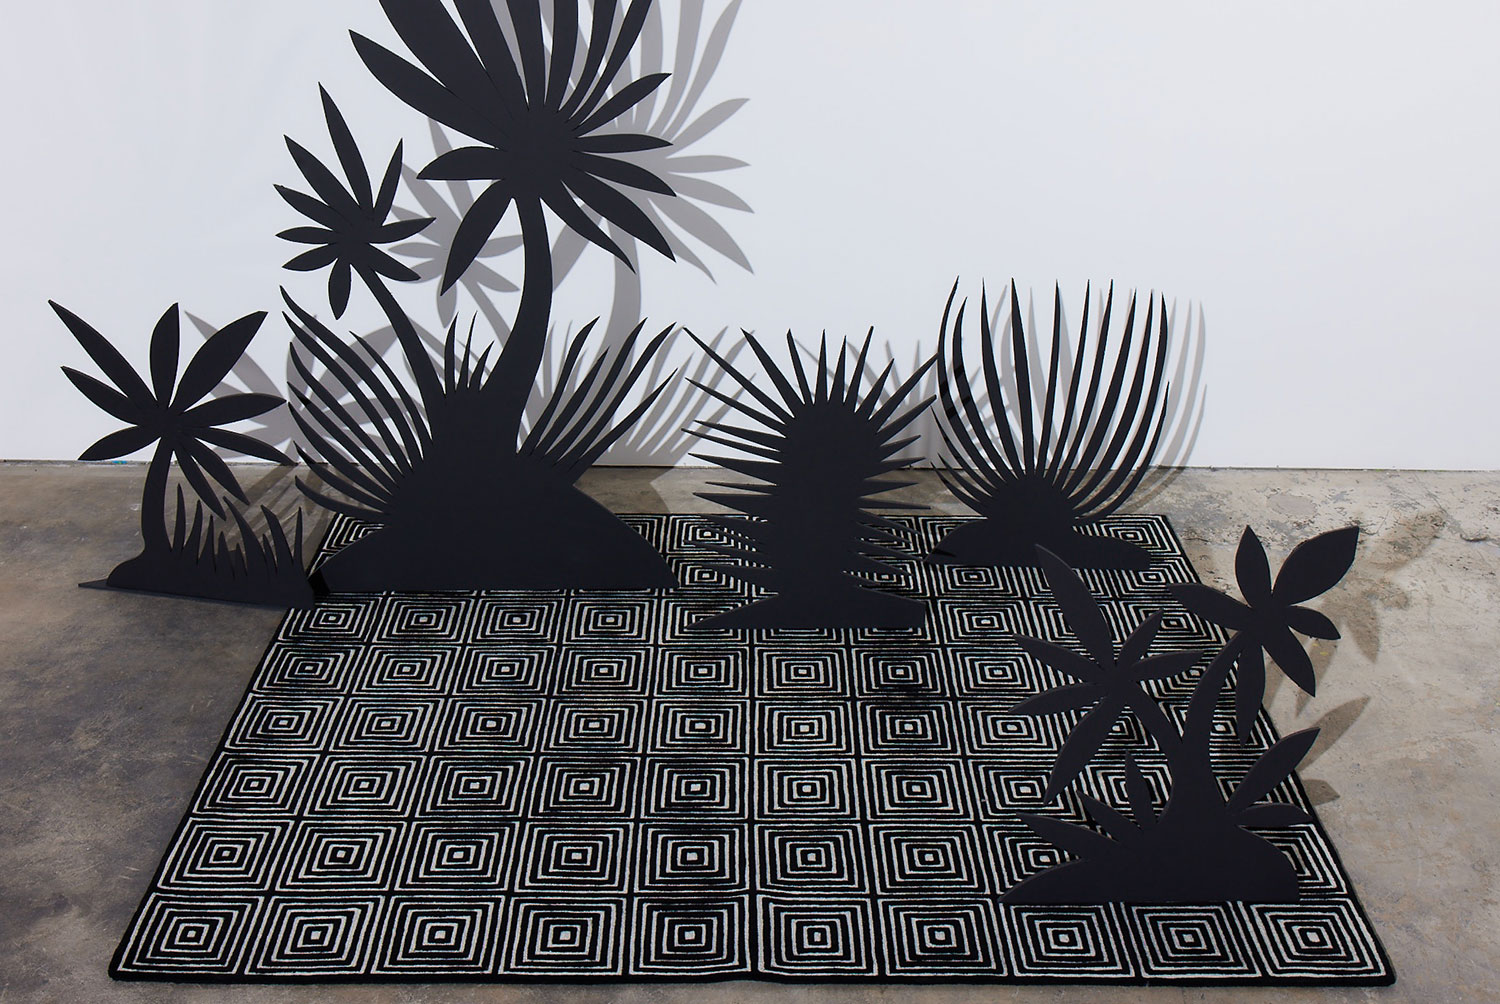 Black silhouettes of plants sit on a black and white, patterned, modern area rug called Duke Vivid by Angela Adams